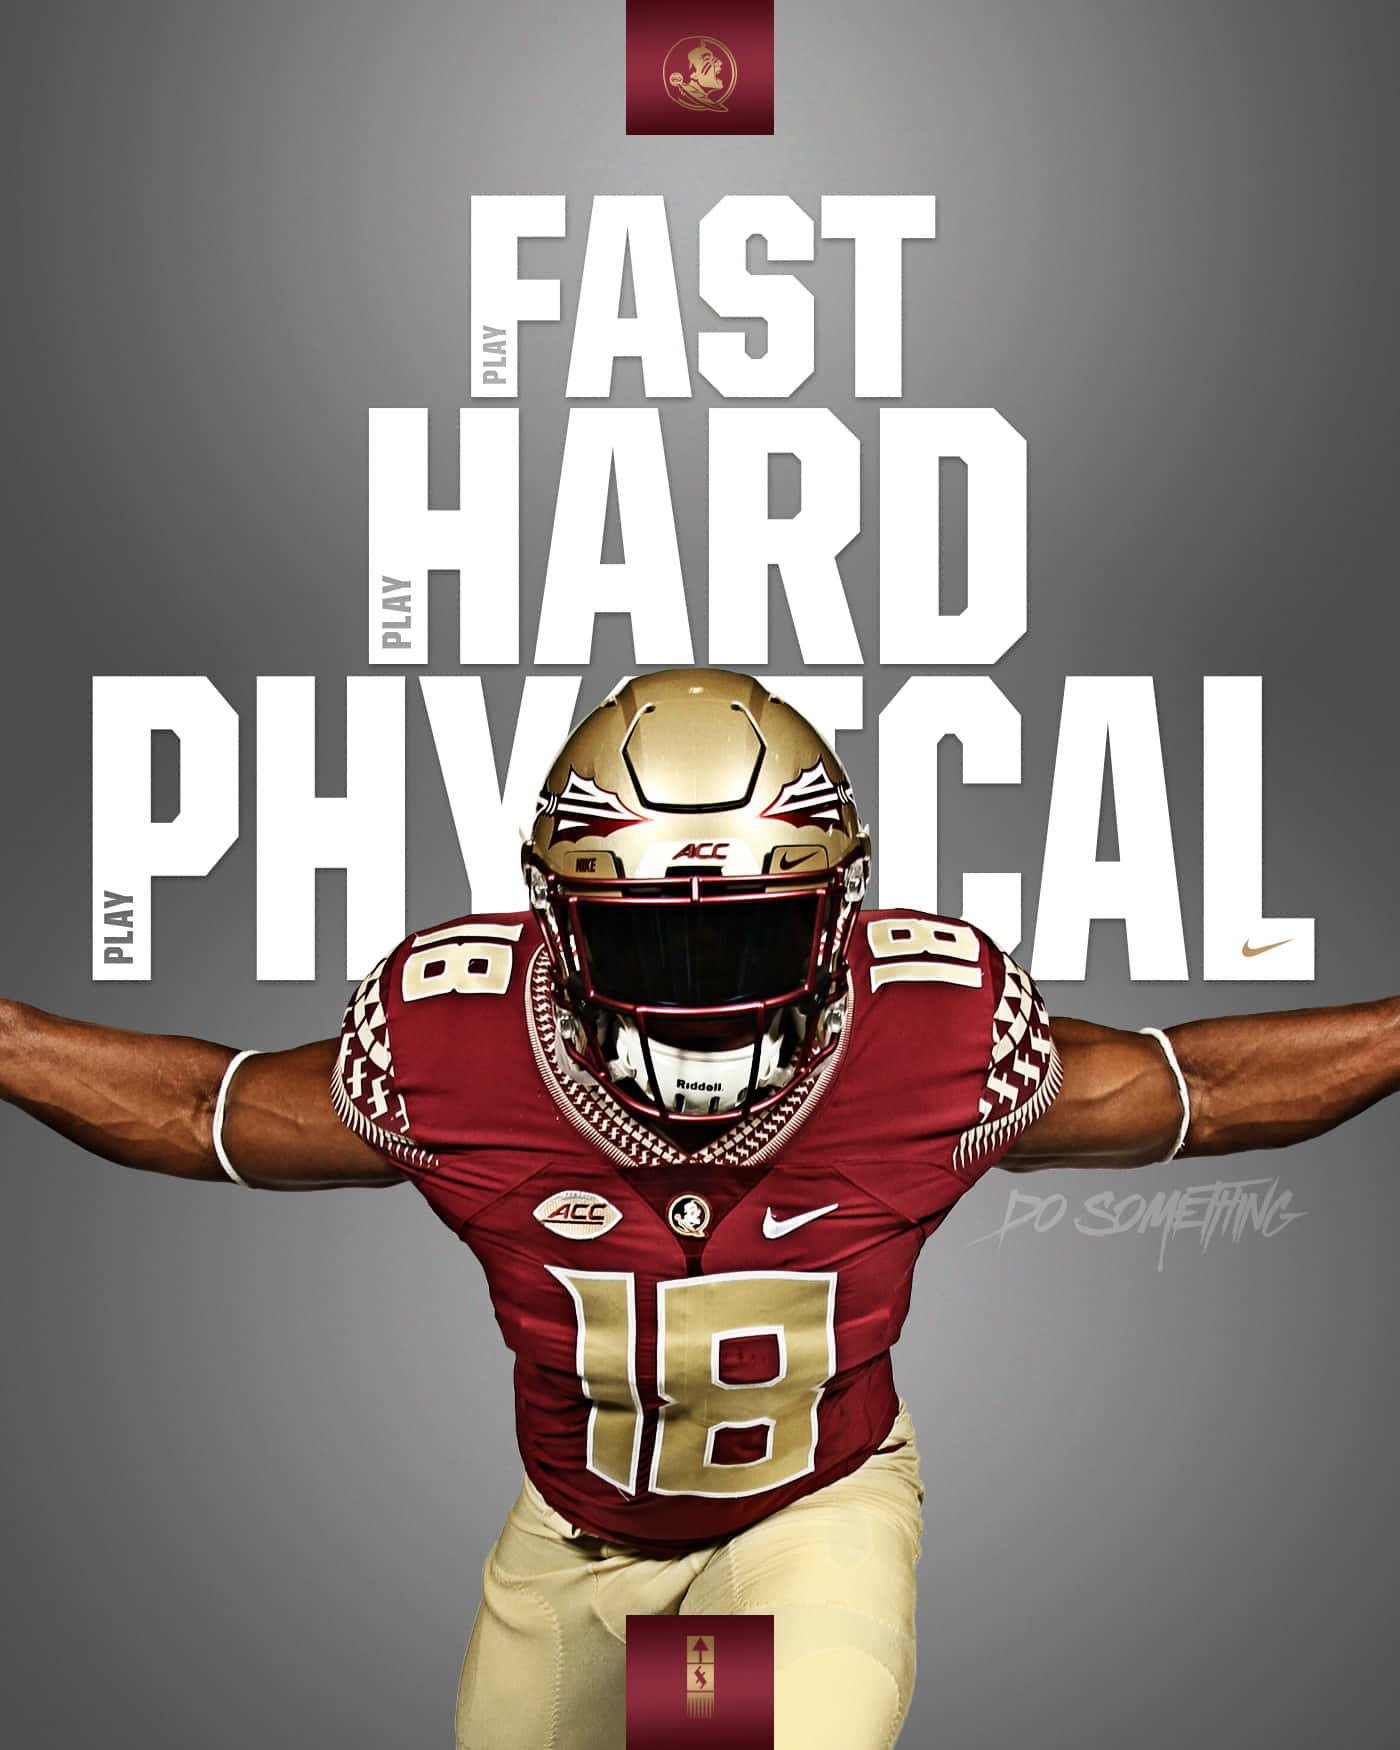 Don't forget to represent your Florida State University pride! Wallpaper